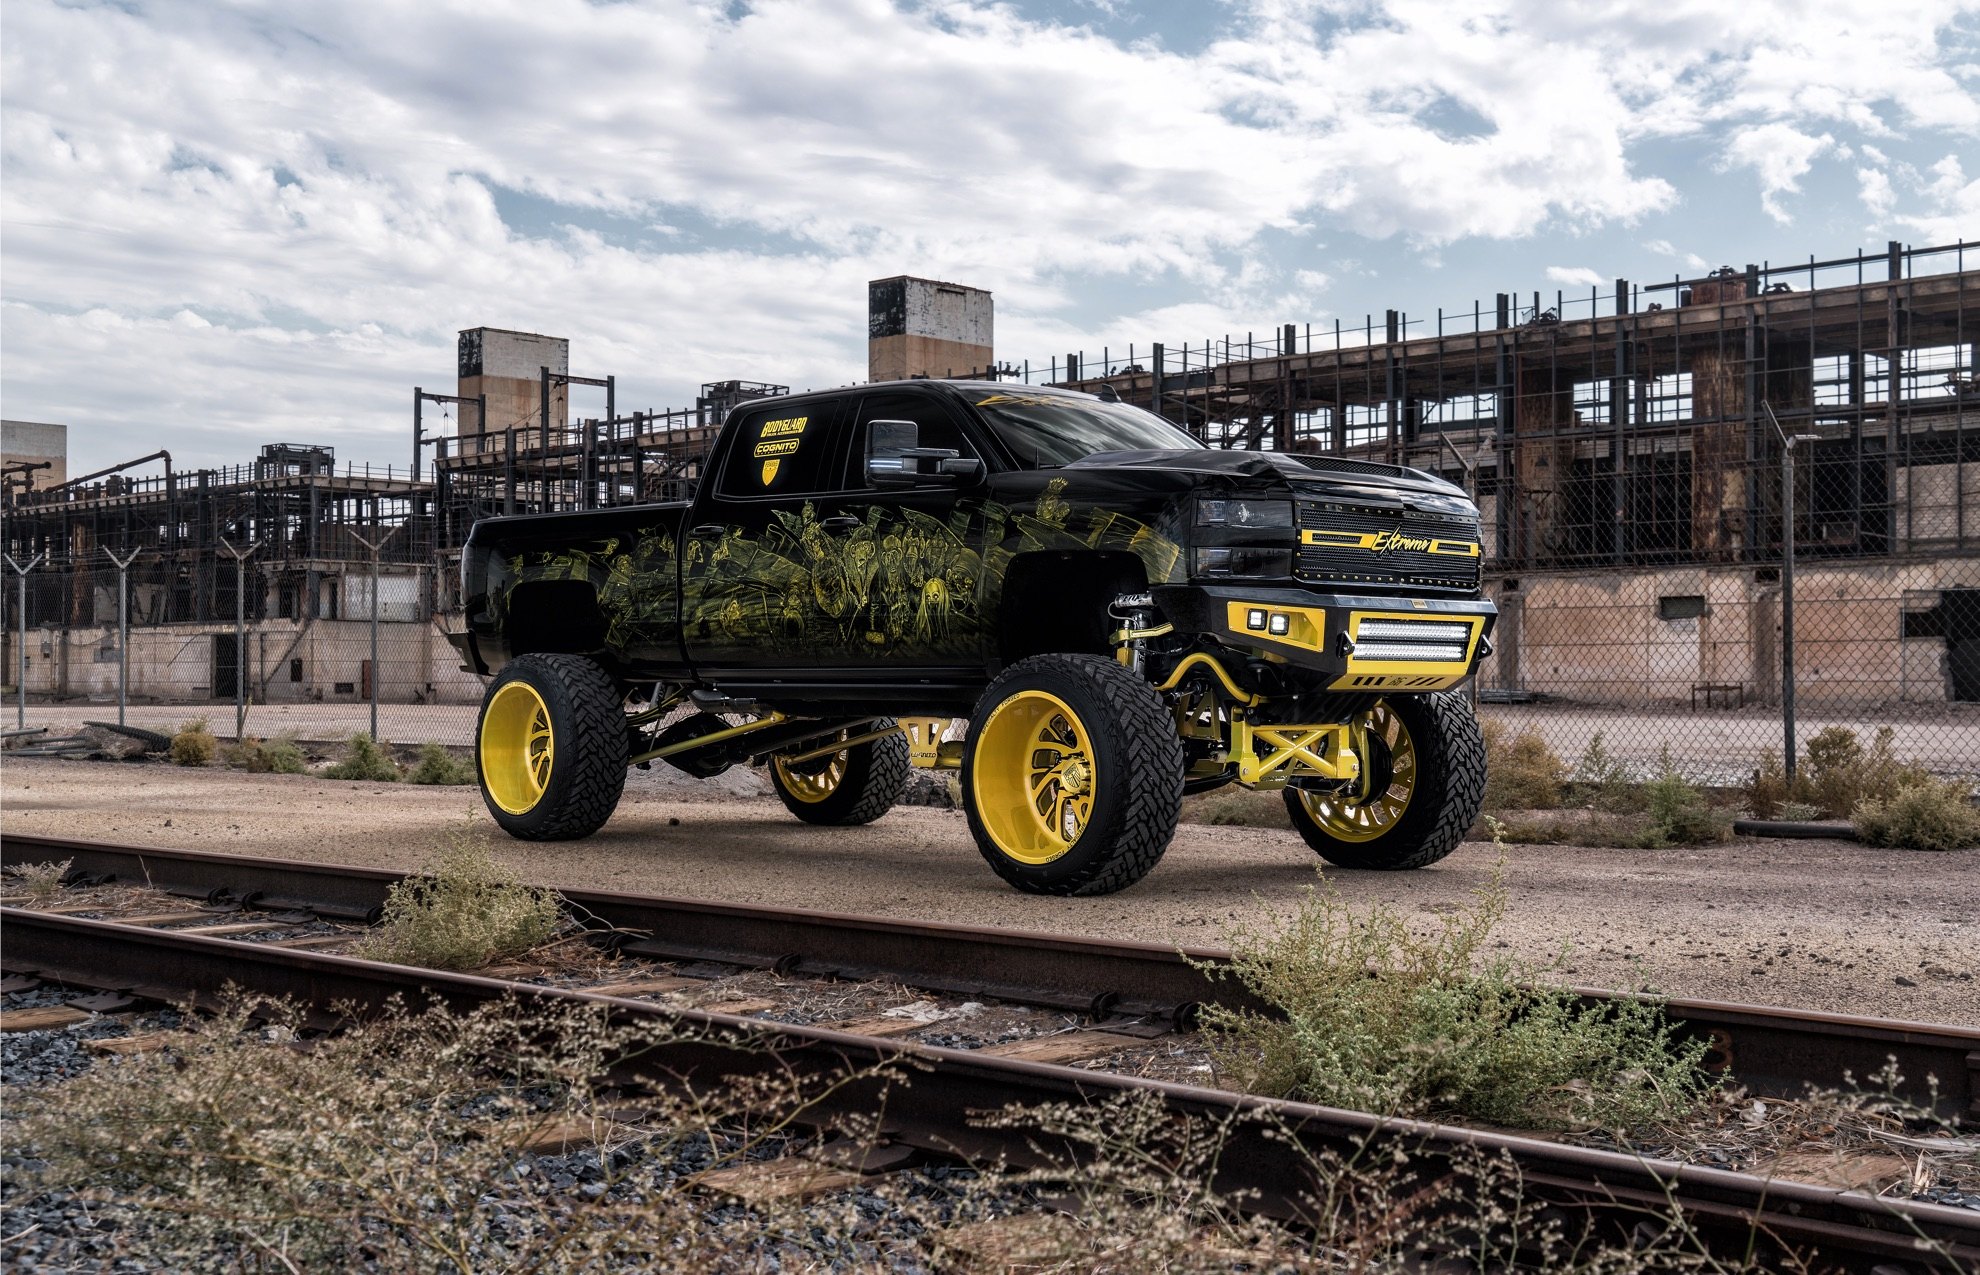 Chevy Silverado 2500 with awesome custom paint job - Photo by Dale Martin (LFTD & LVLD Magazine)